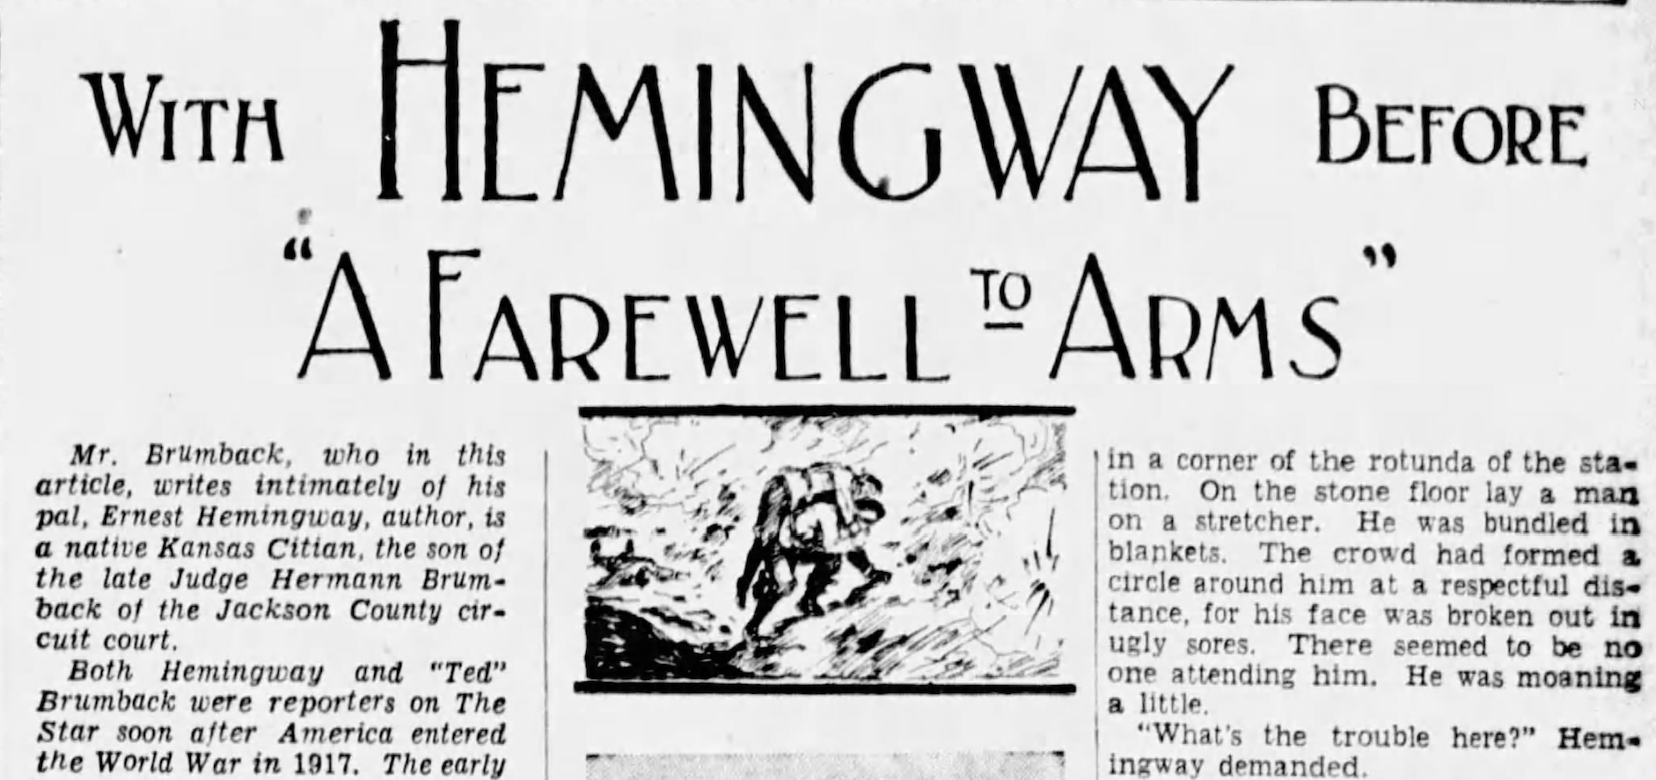 A newspaper clipping from Ted Brumback's memoir article about his time in the World War 1 ambulance service with Ernest Hemingway. A woodcut image of one solder carrying another, wounded, on his back, appears below the headline.